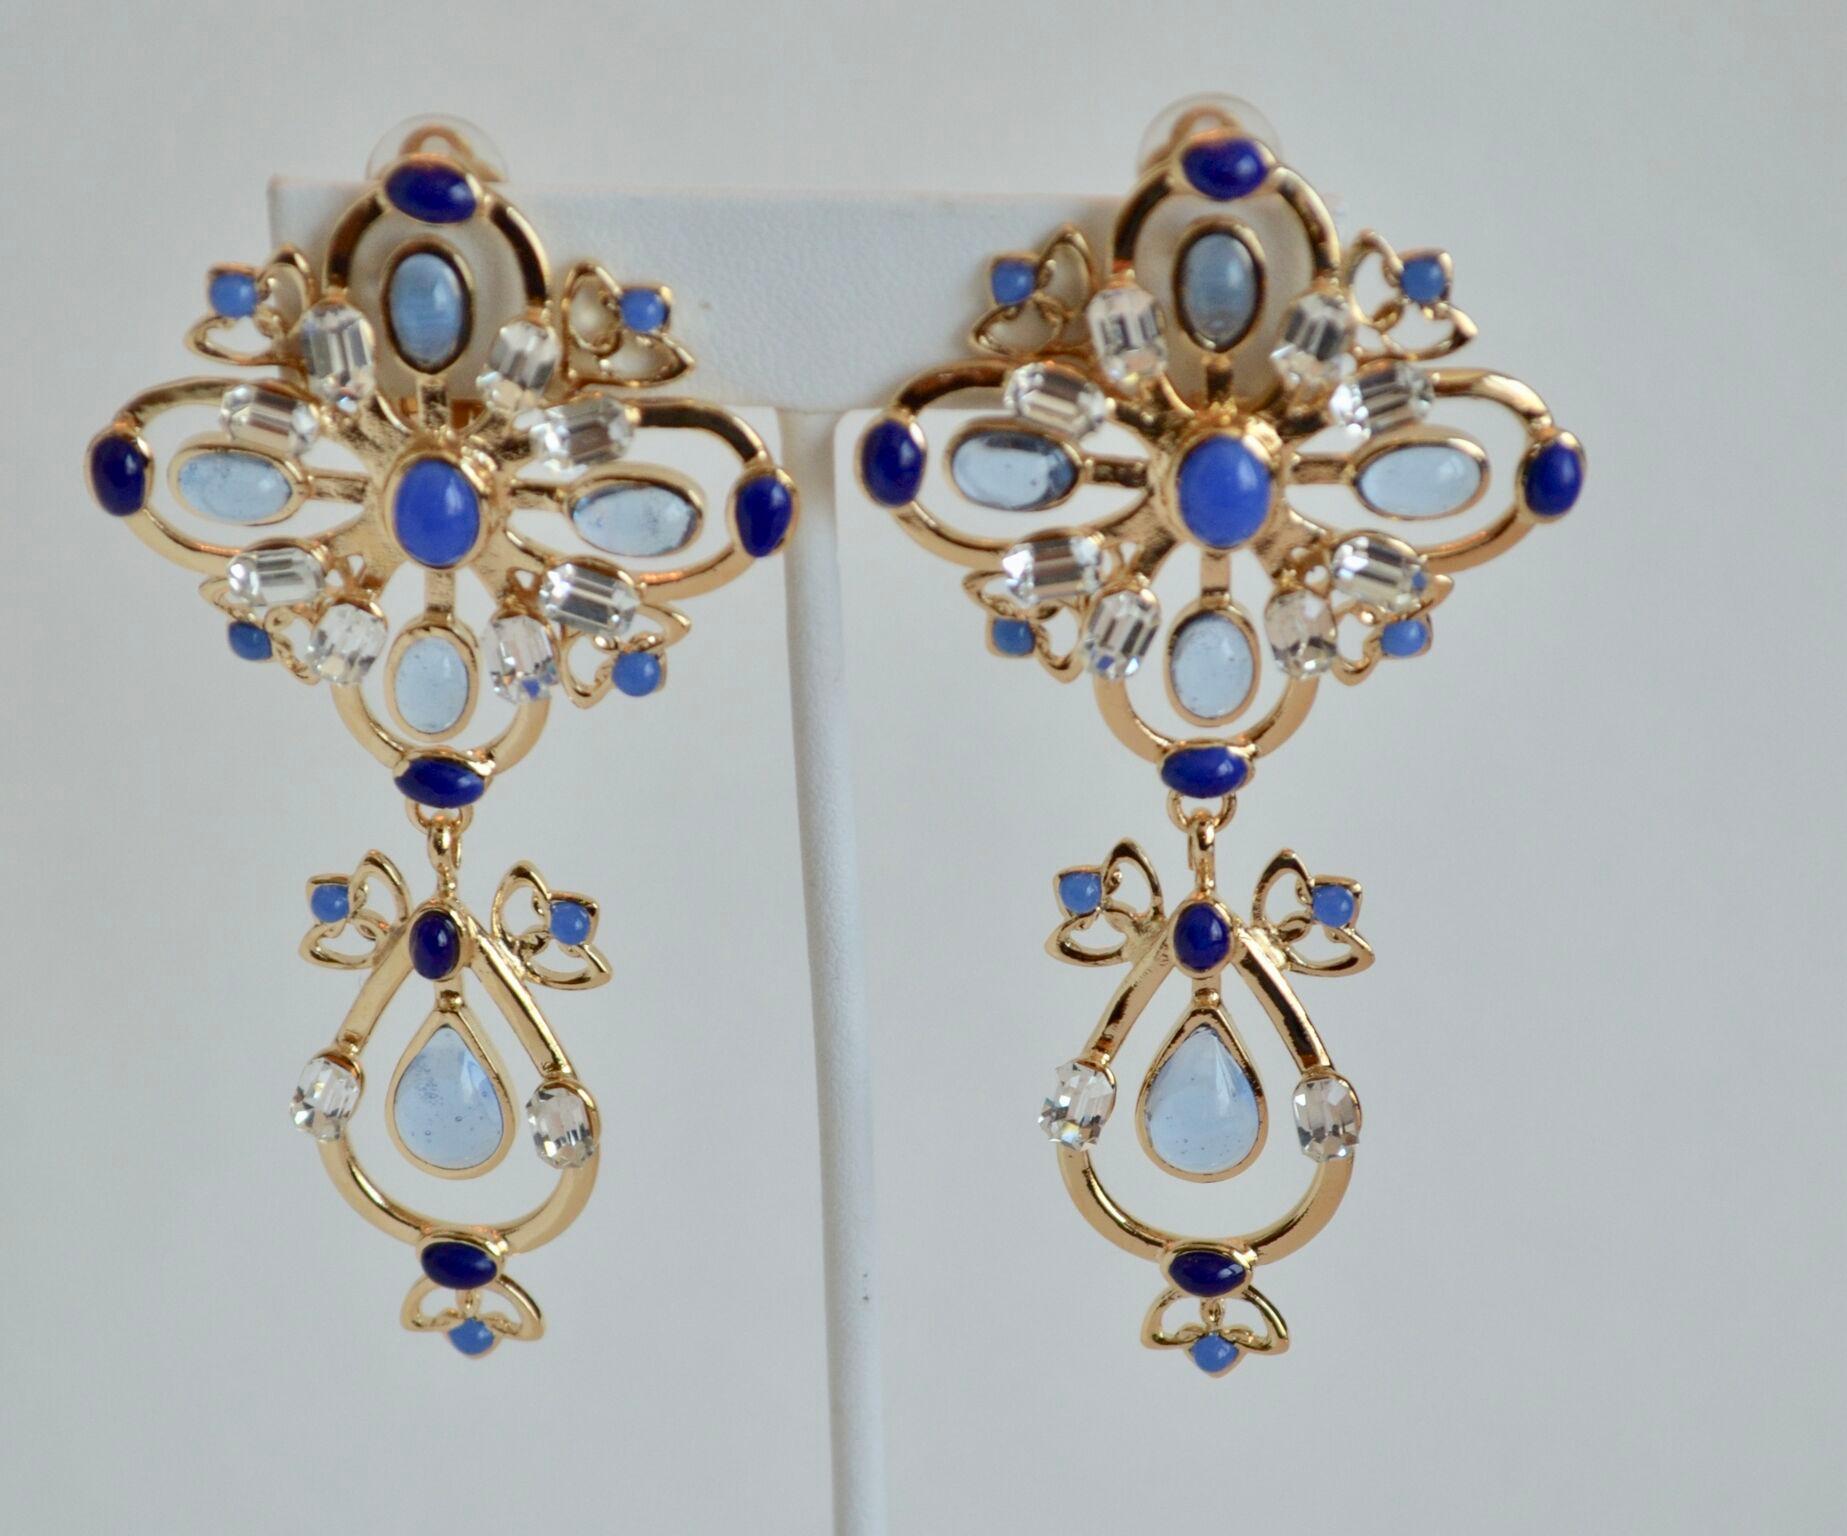 Gripoix Paris poured glass, gold (24k) plated brass,  and crystal drop clip earrings. 

Total length: 8.5 cm